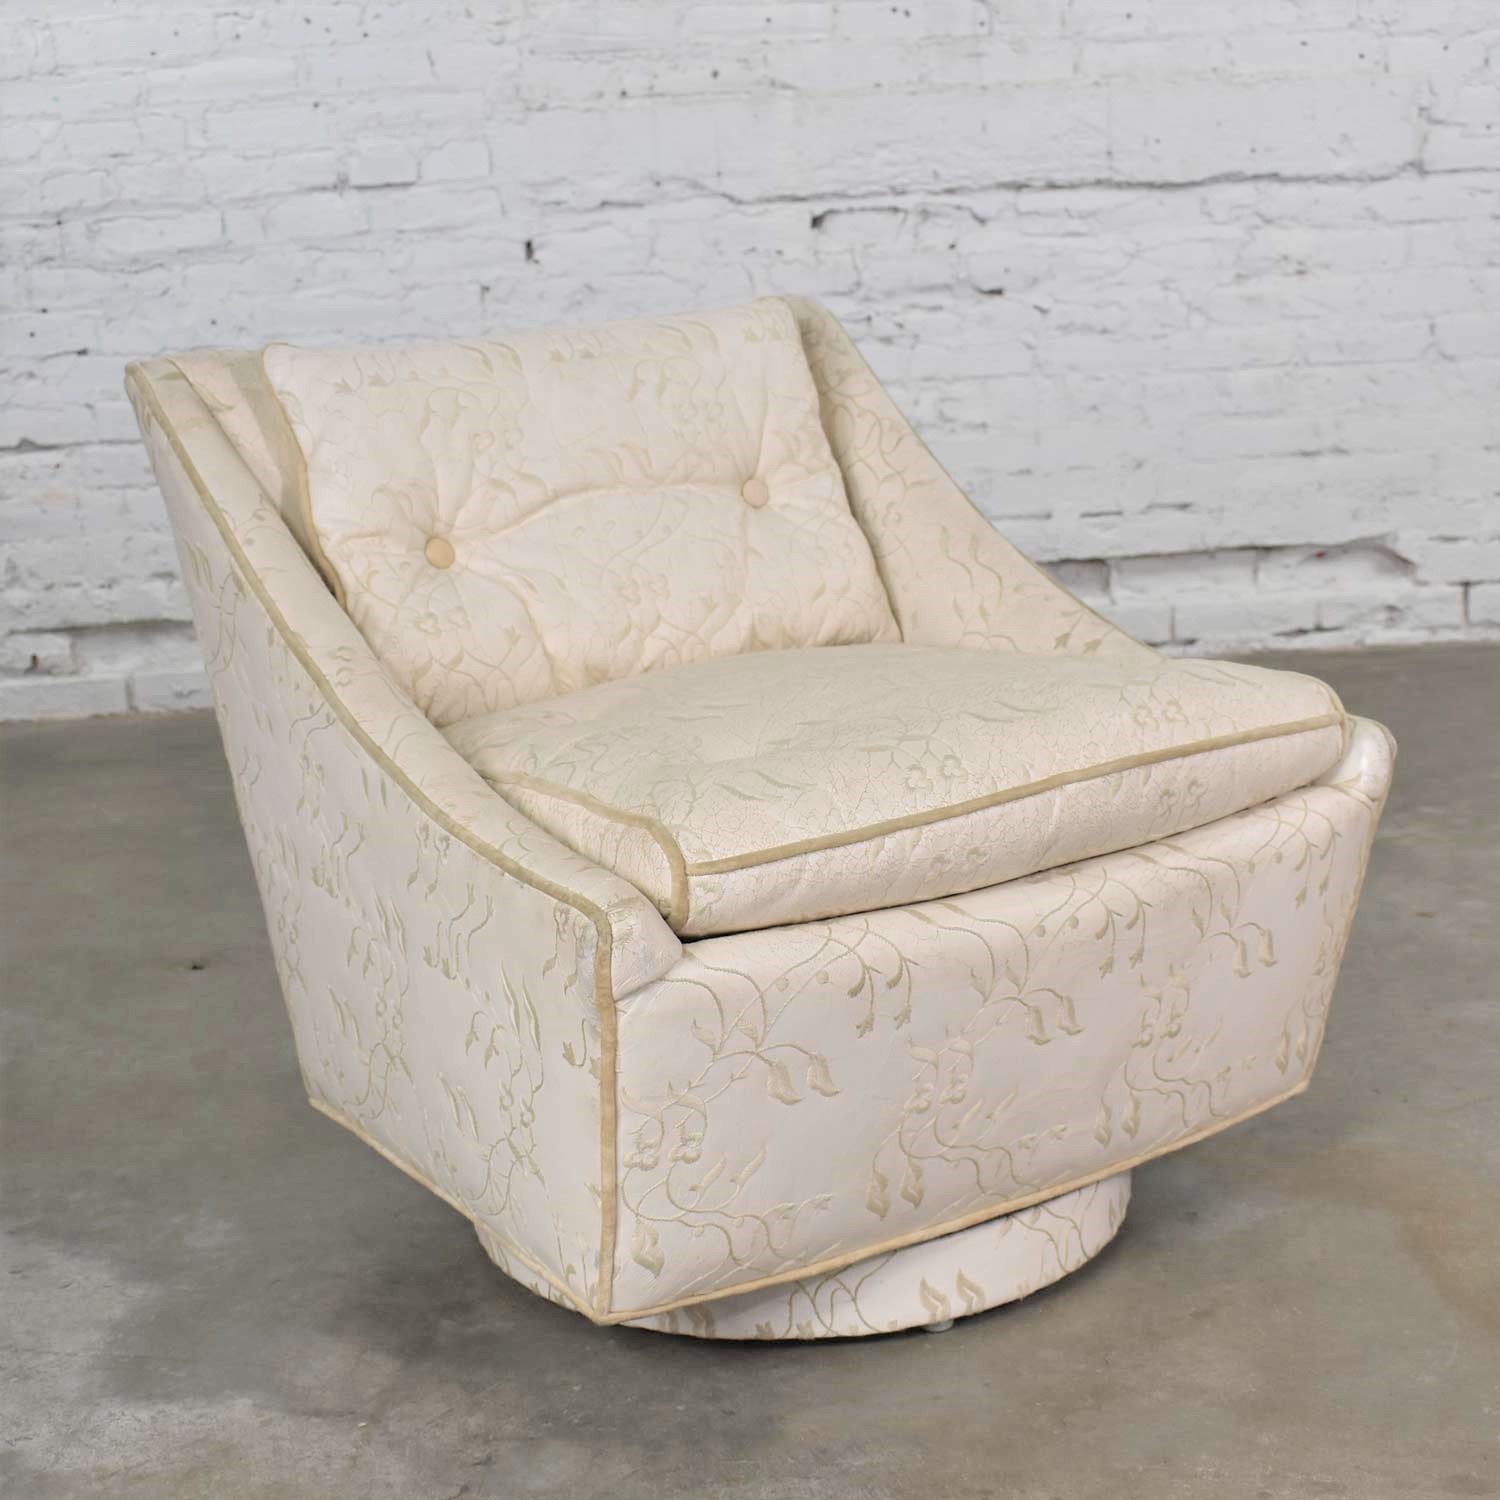 Vintage Art Deco Petite White Swivel Chair with Embroidered Leather by Oxford Ltd.